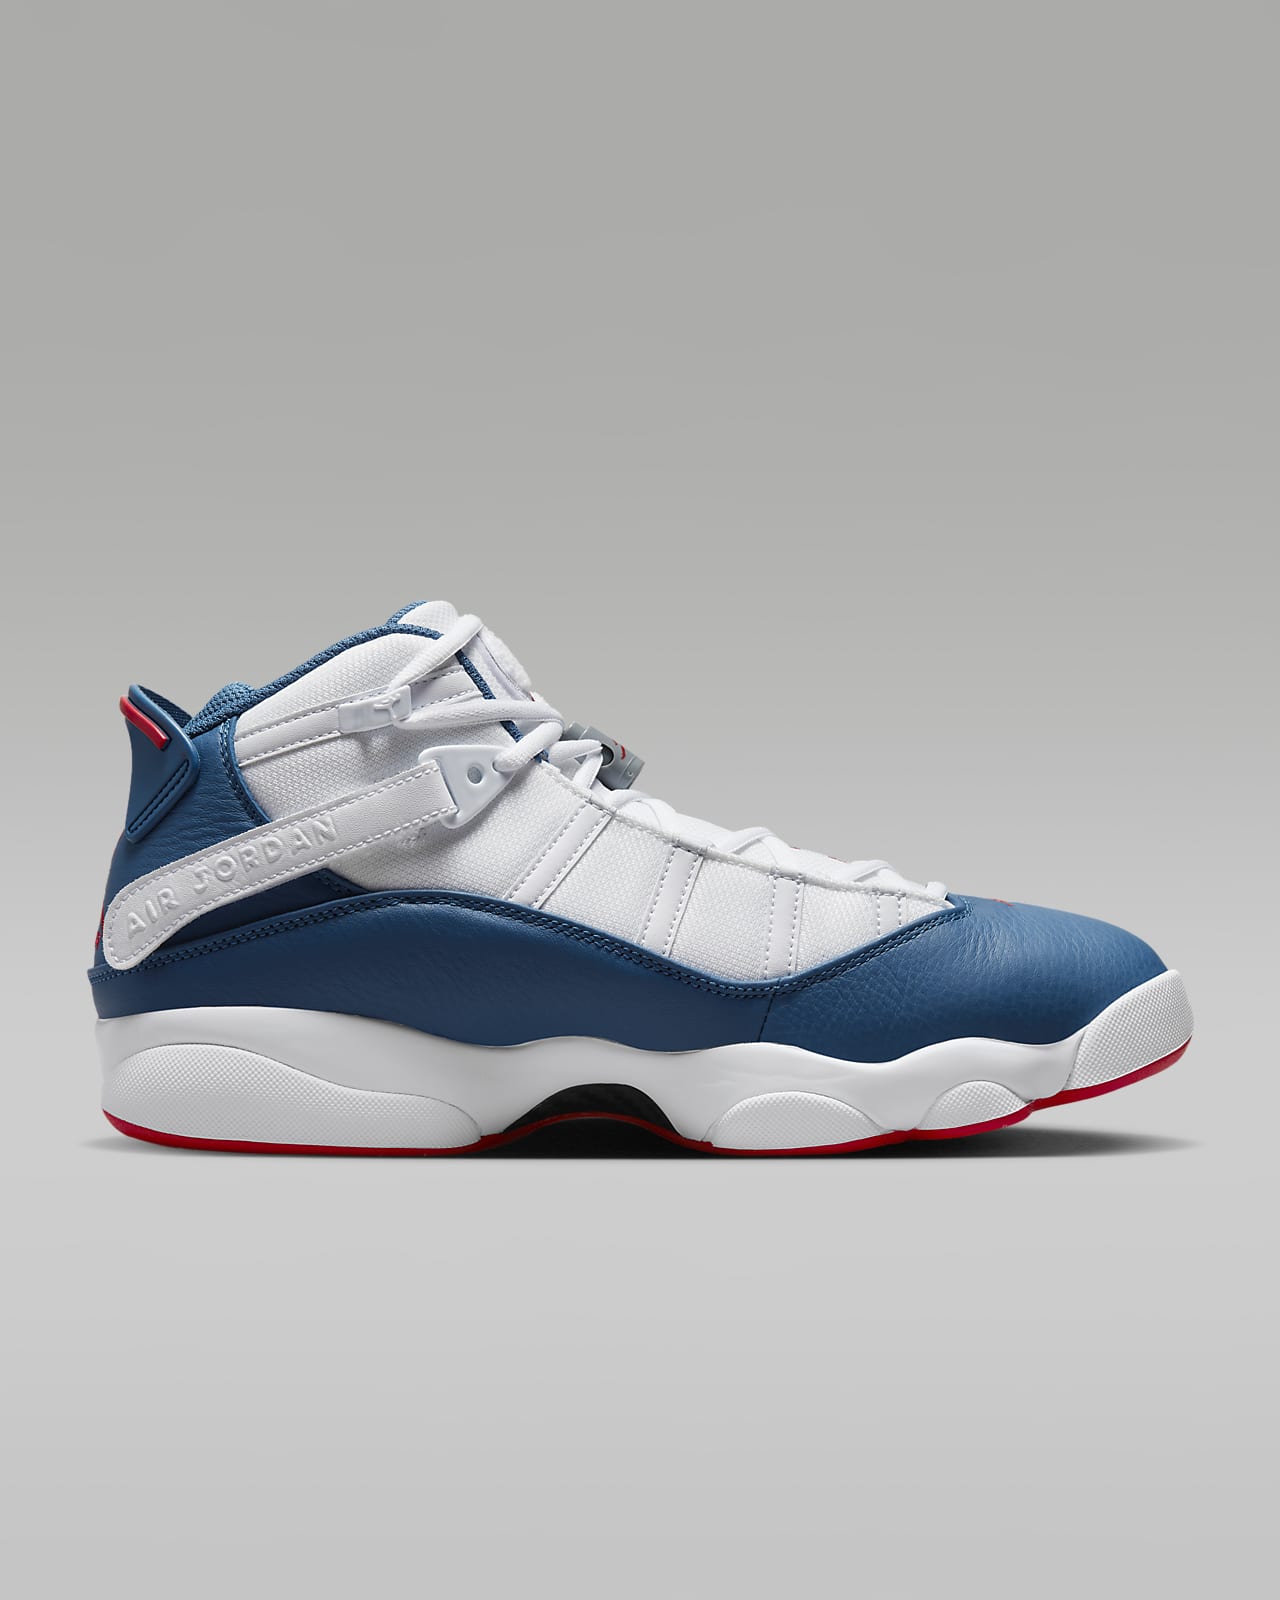 Air Jordan 12 Low Golf Shoes (White/French Blue, us_Footwear_Size_System,  Adult, Men, Numeric, Medium, Numeric_9_Point_5)